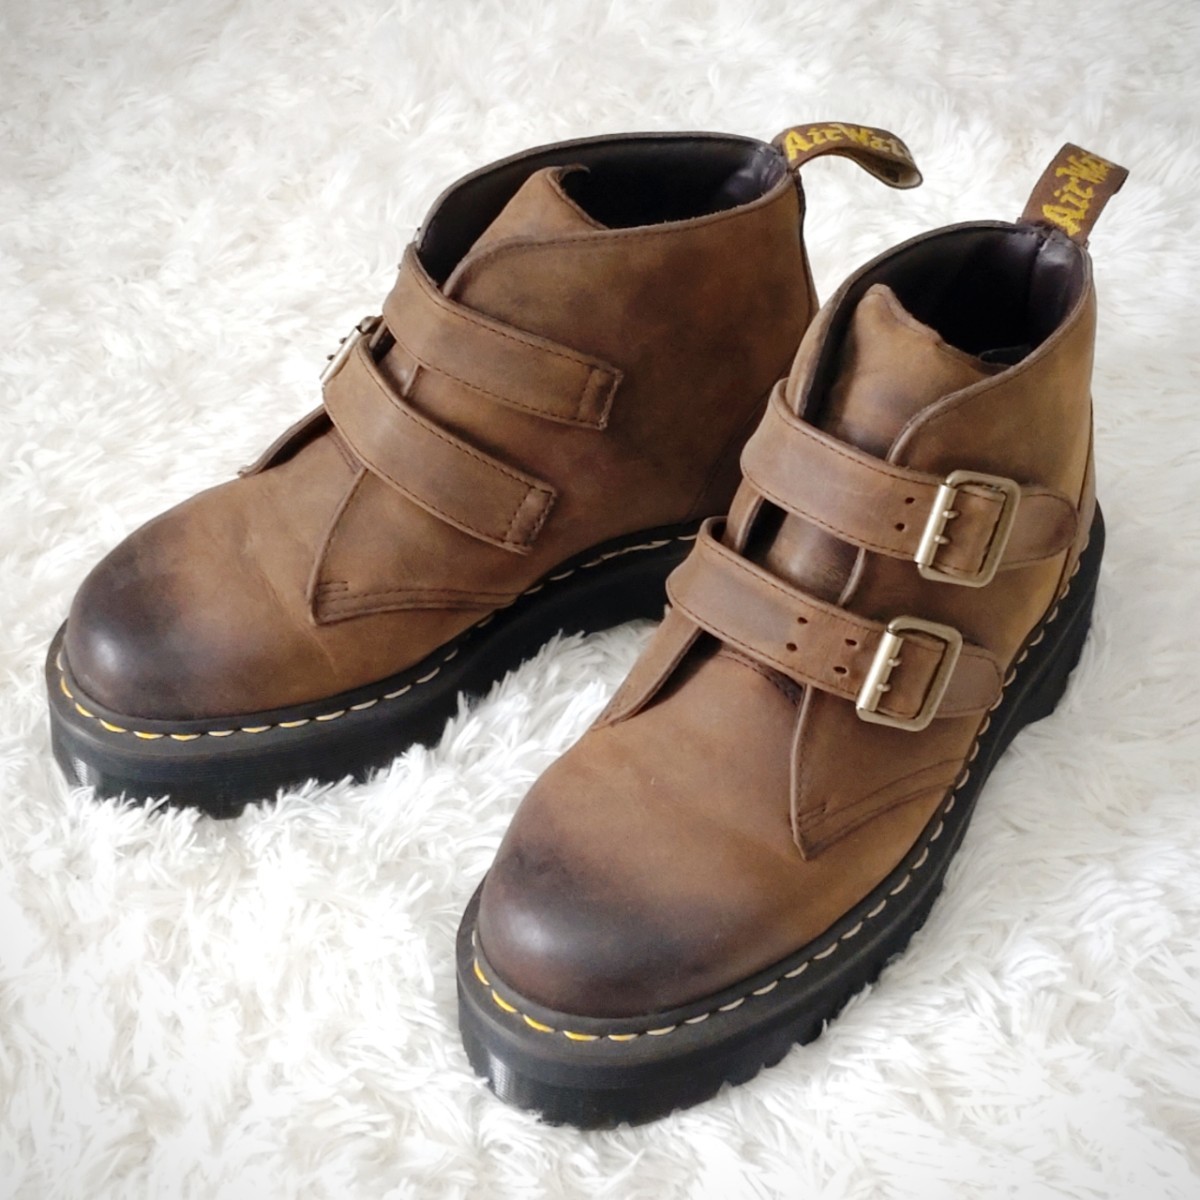 Dr.Martens Devon 2 Strap Ankle Boot uk8 ストラップ ブーツ アギネス レザー 厚底 RED WING BUTTERO PADRONE Tricker's George cox_画像2